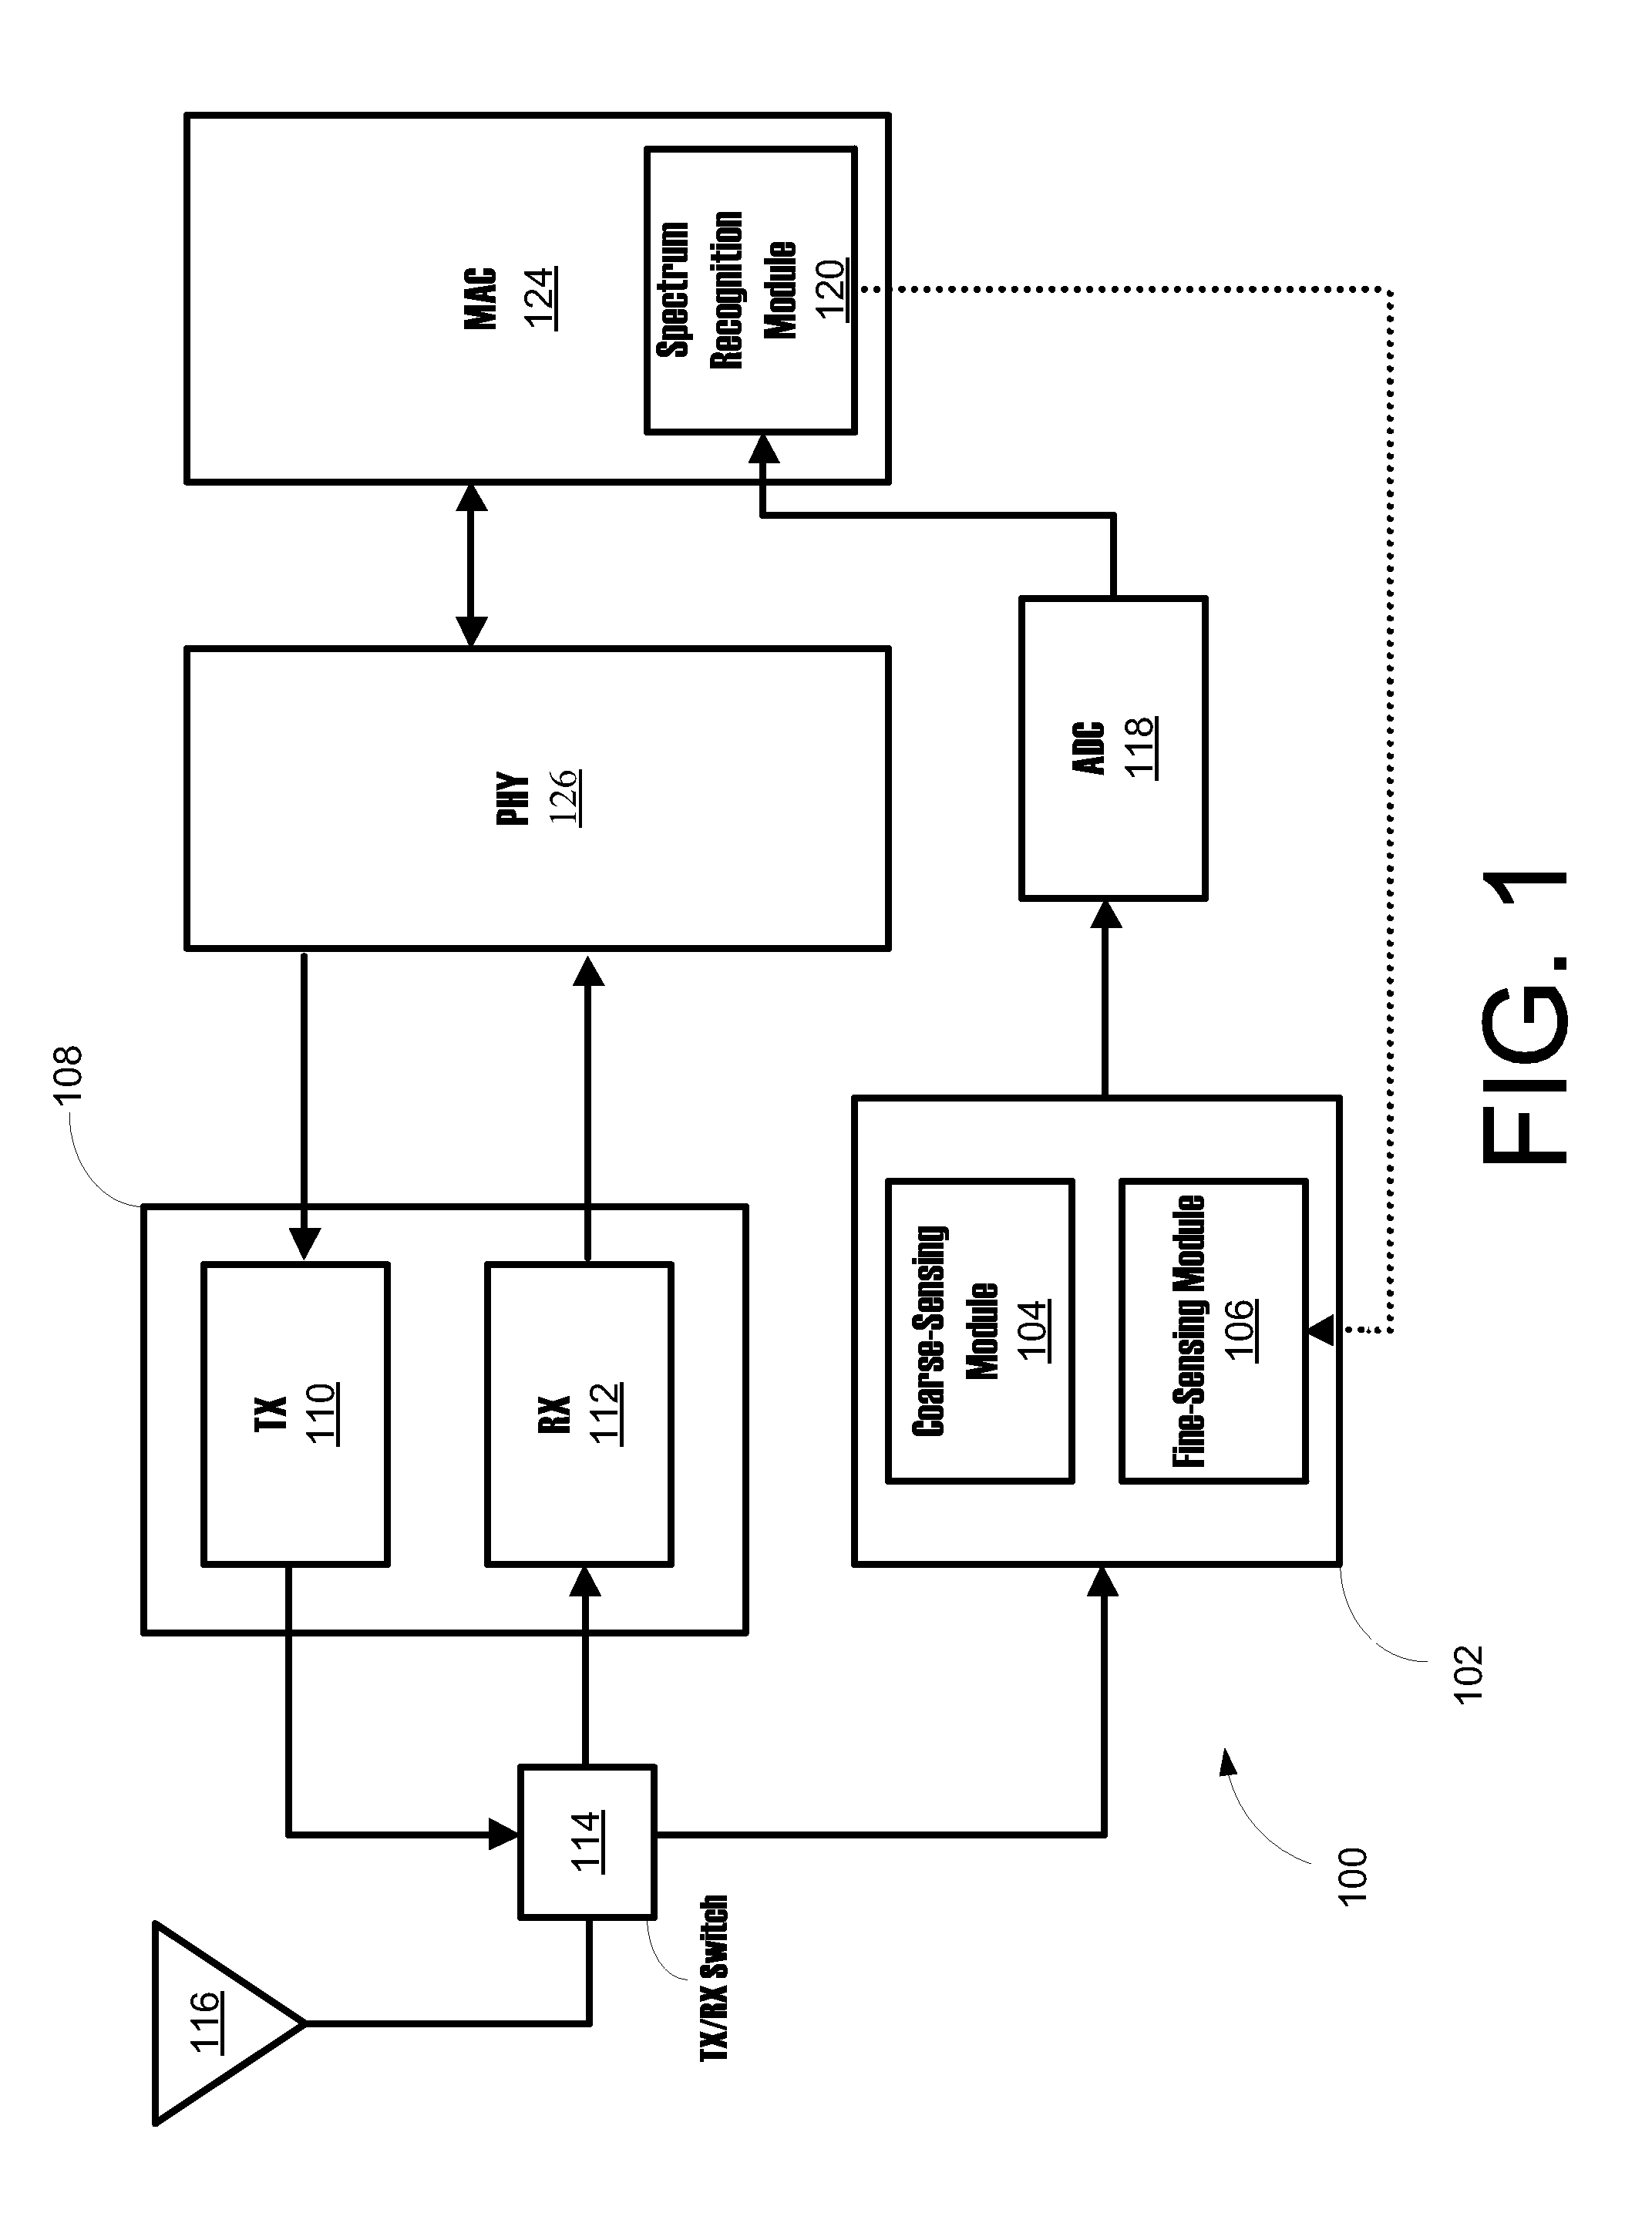 Systems, methods, and apparatuses for coarse spectrum-sensing modules